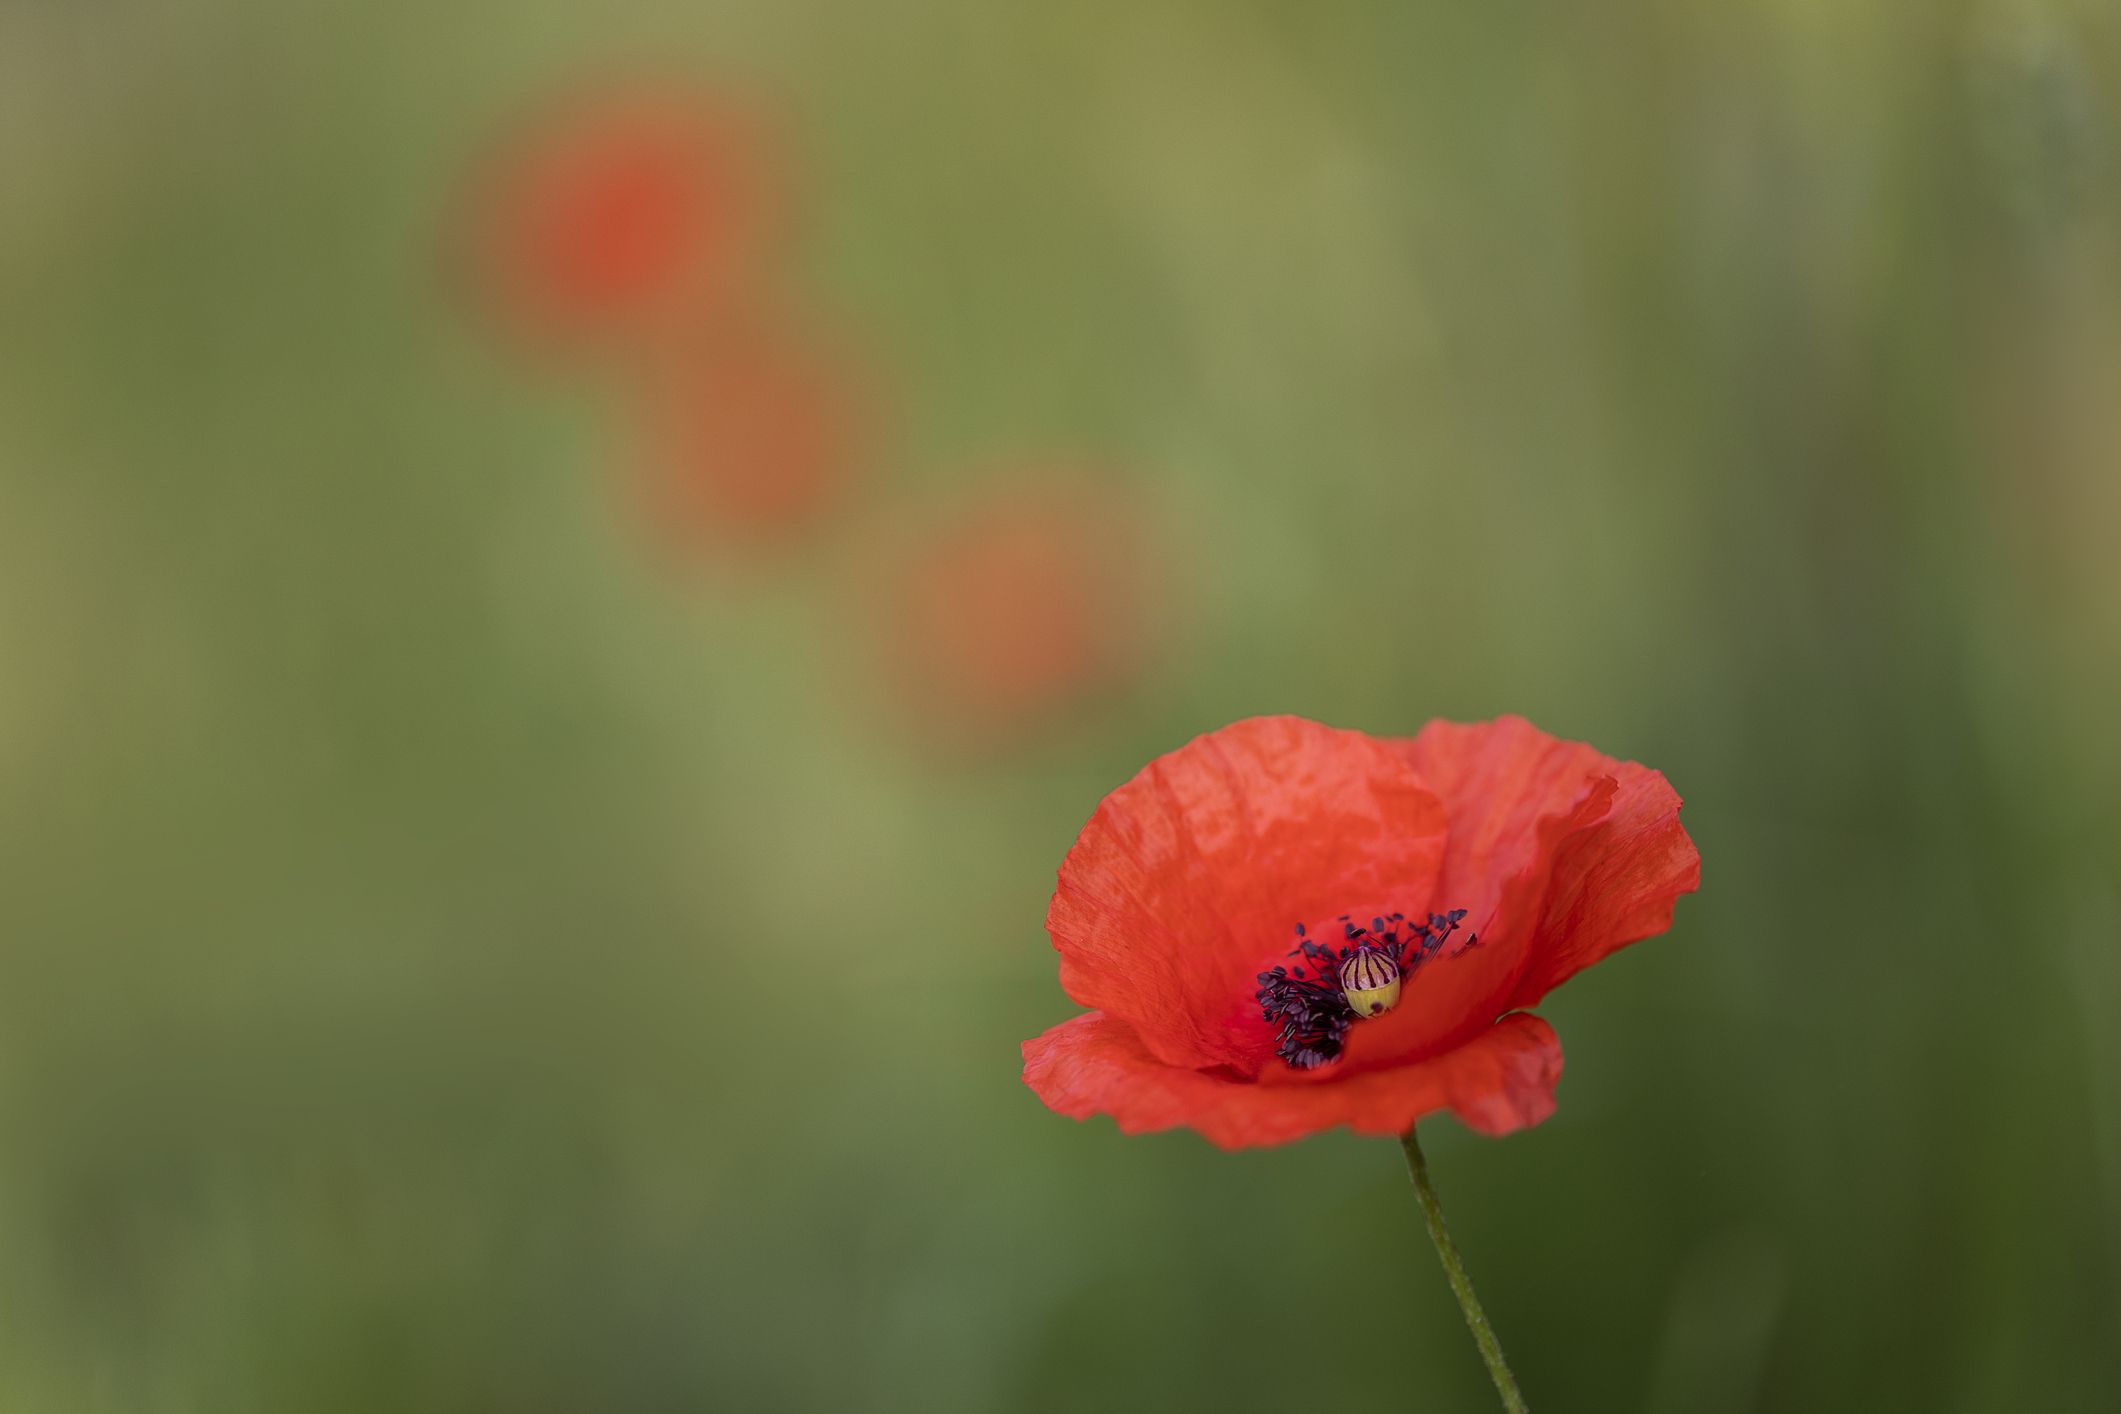 Memorial Day Poppies - History of the Red Poppy for Remembrance